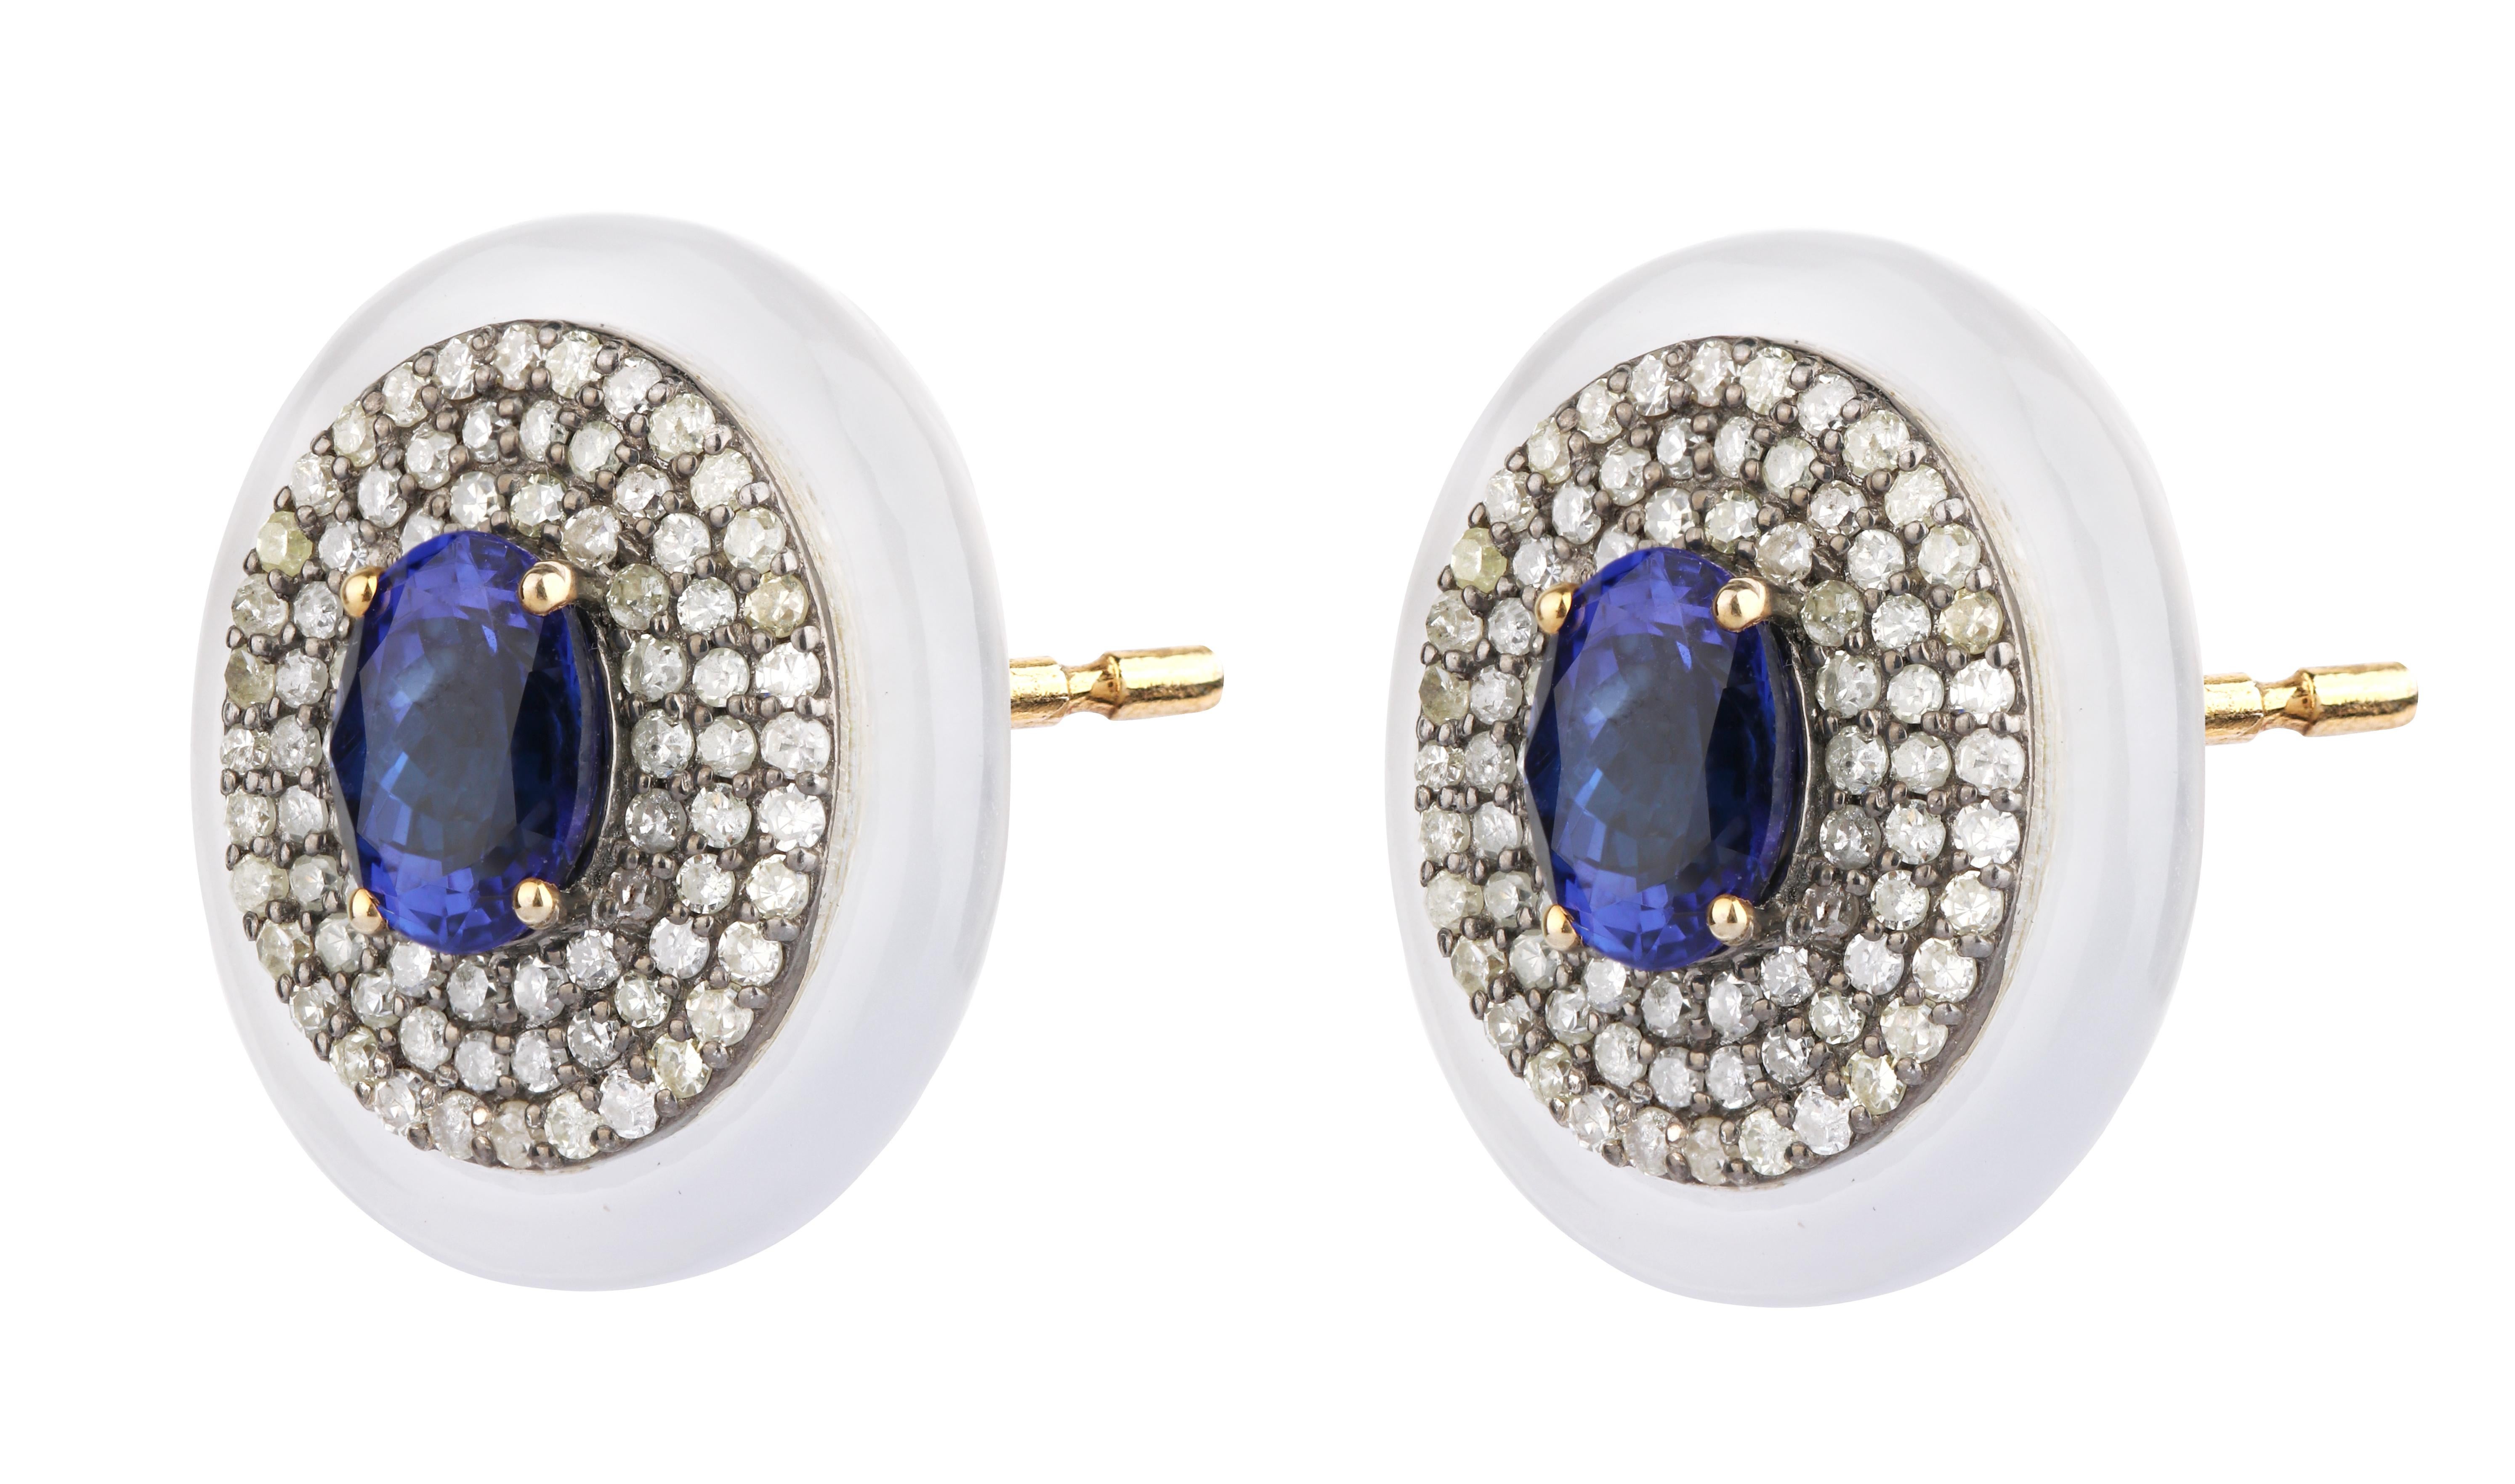 Contemporary 2.96 Carat Diamond, Tanzanite, and Chalcedony Stud Earrings For Sale